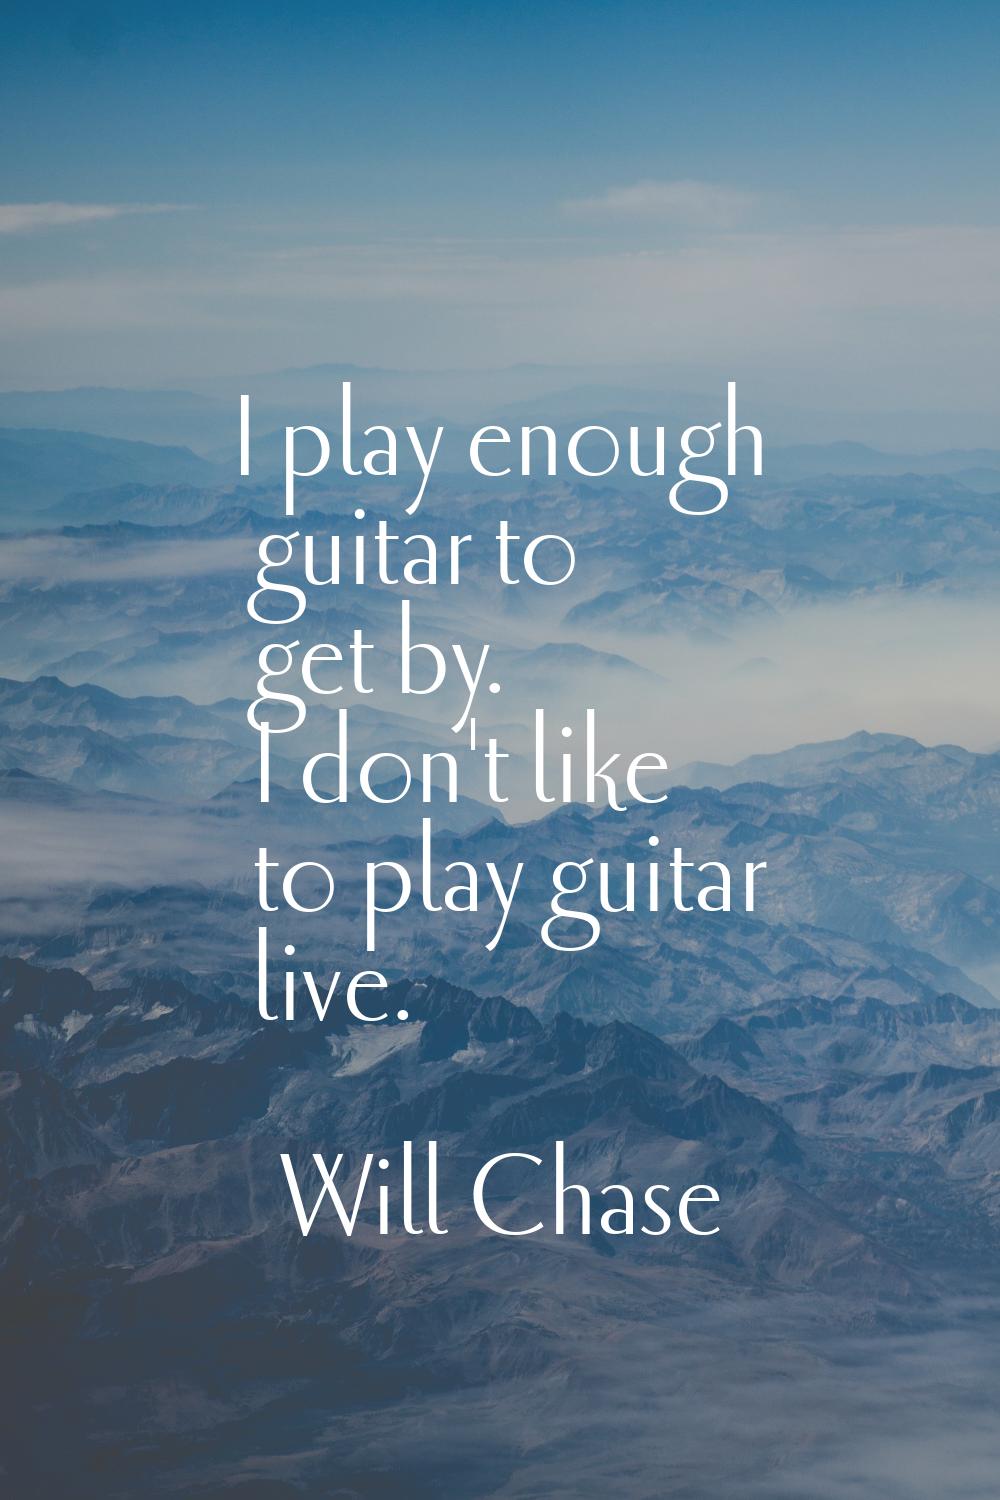 I play enough guitar to get by. I don't like to play guitar live.